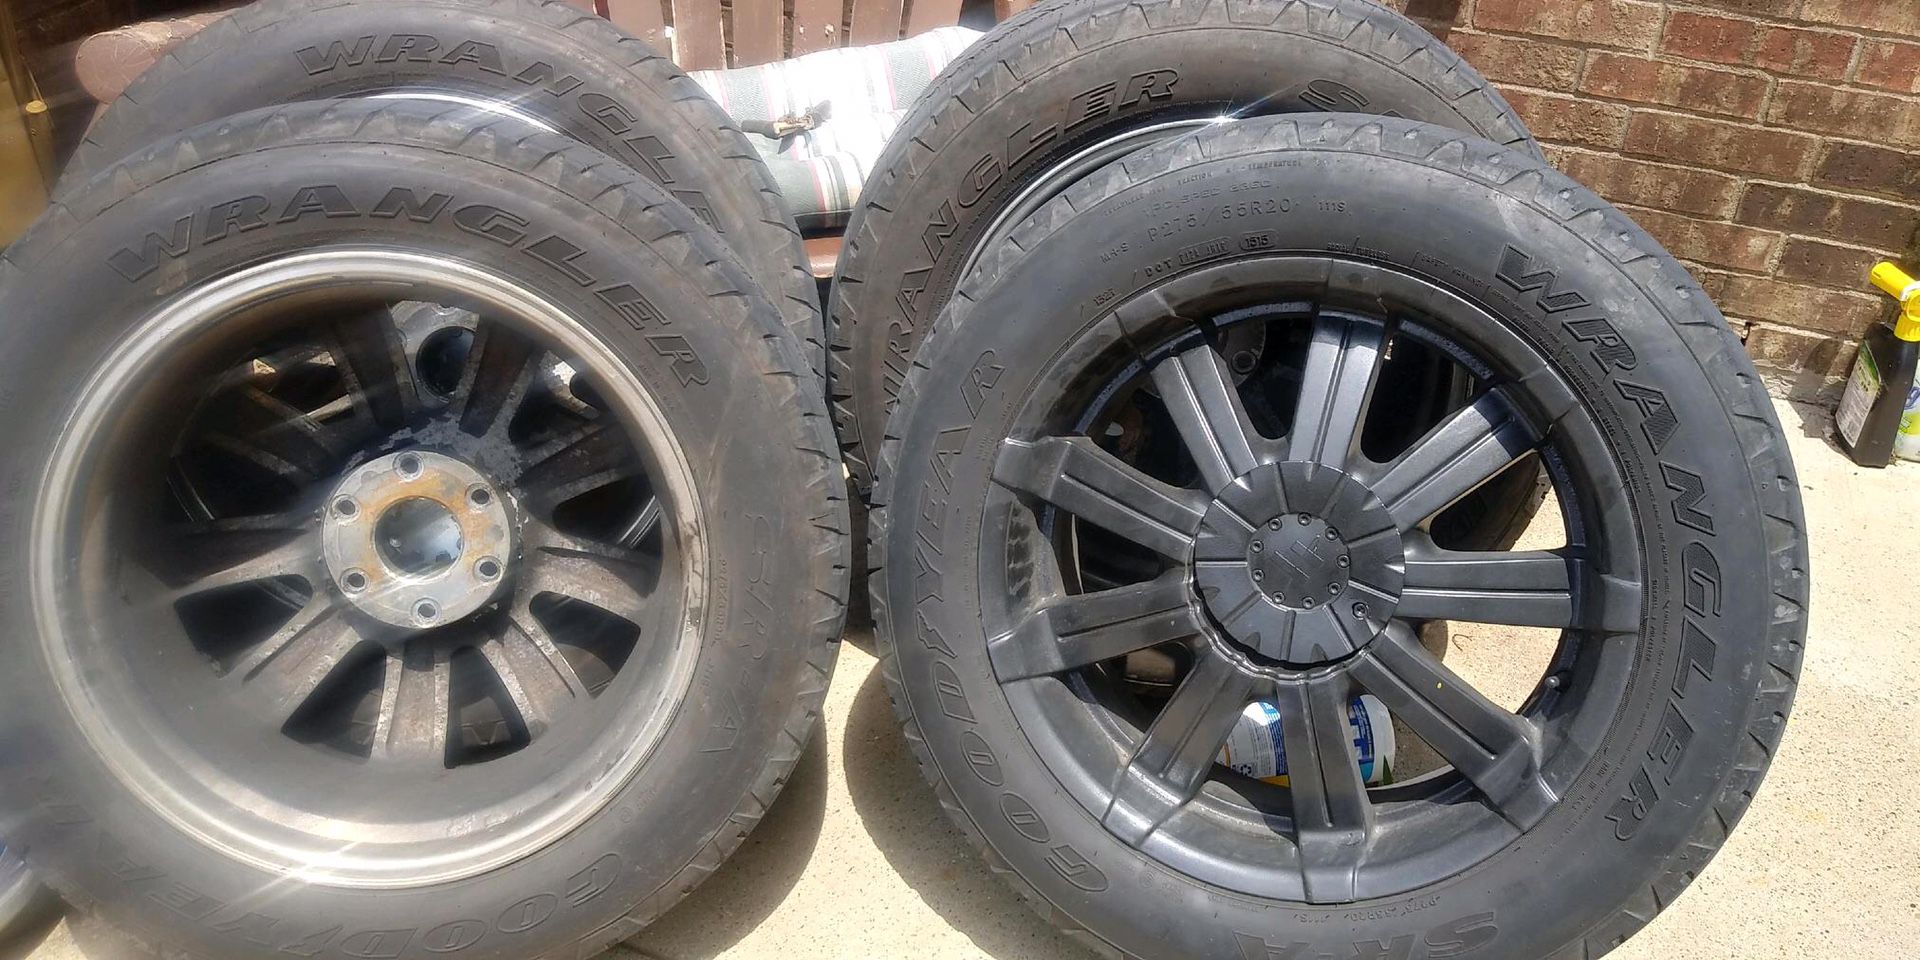 Rim for Chevy or any other 6 lug truck .Tires are used one cap is missing other than that rims are perfect o.b.o